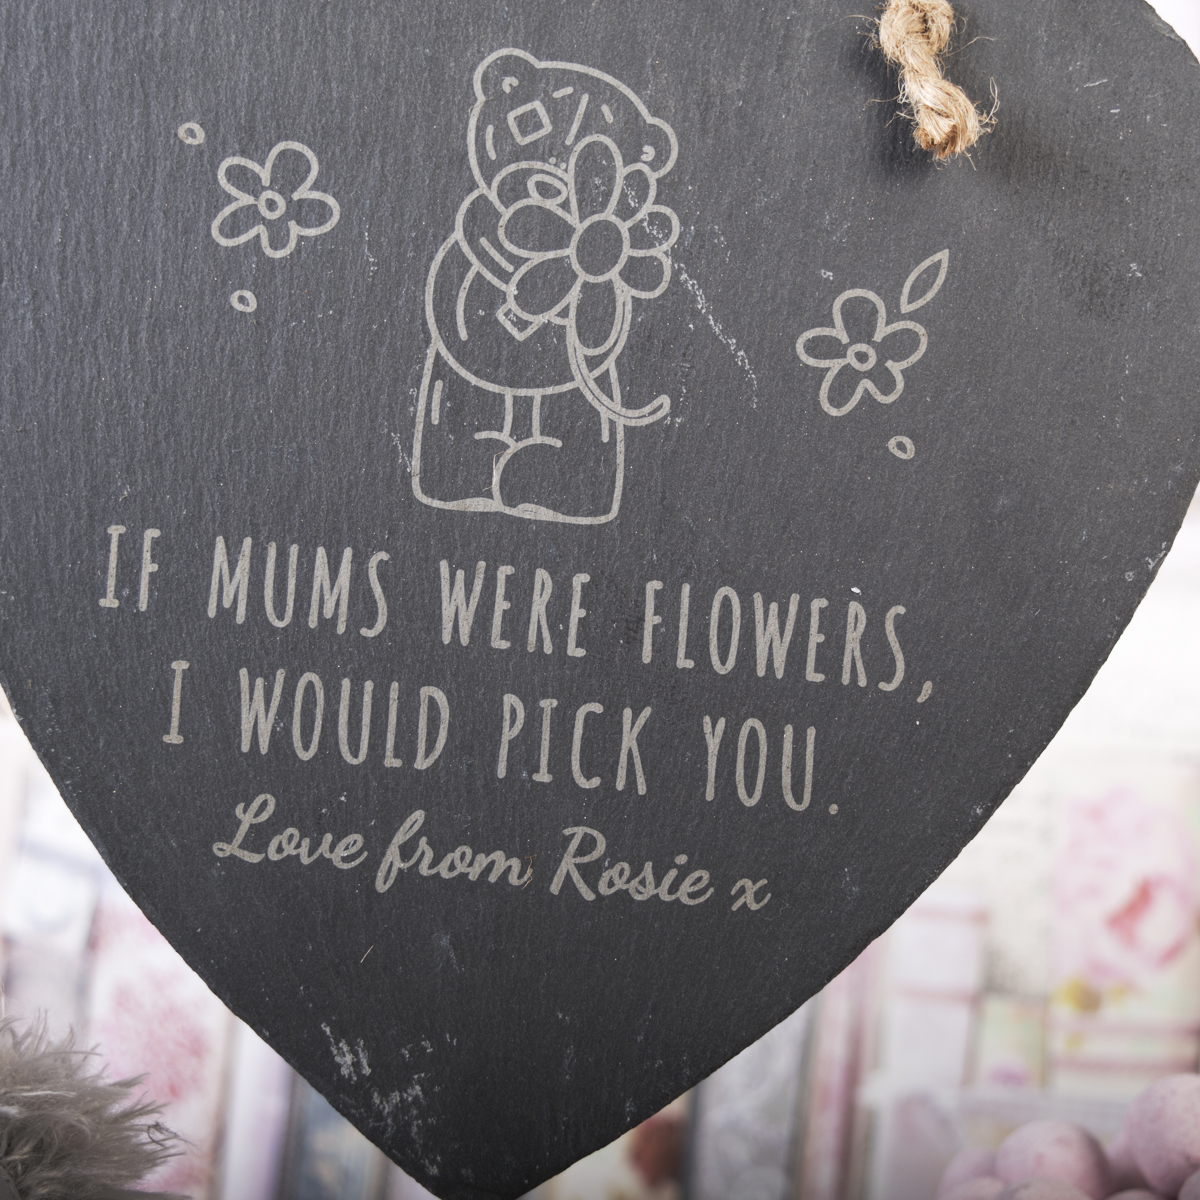 Personalised Medium Me to You Hanging Heart Slate - If Mums Were Flowers